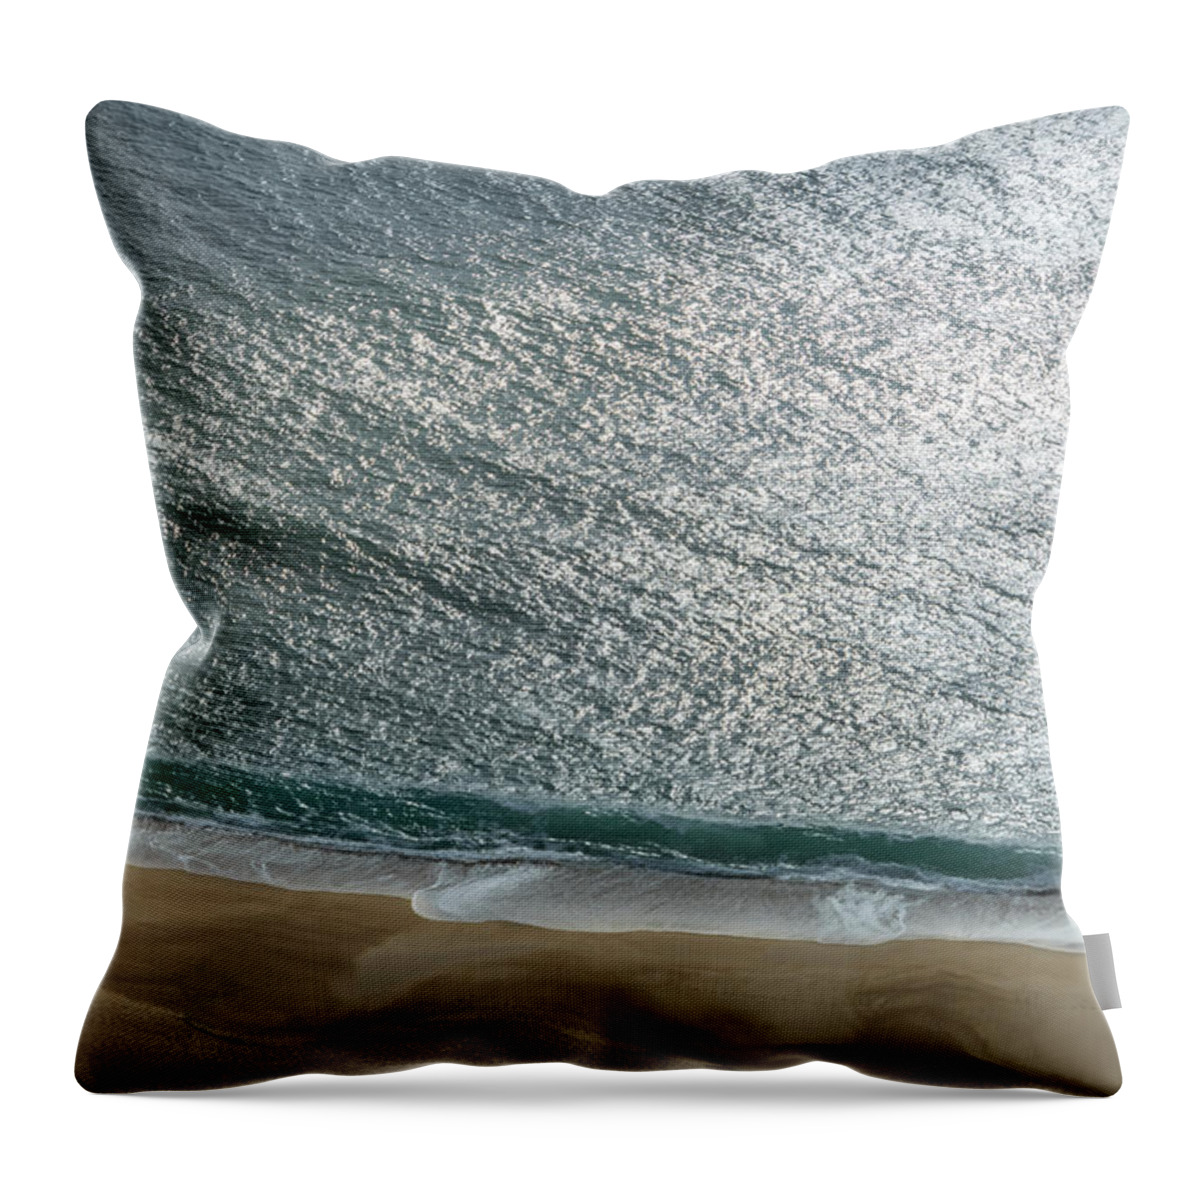 Shimmering Fluid Throw Pillow featuring the photograph Shimmering Fluid Solitude by Georgia Mizuleva